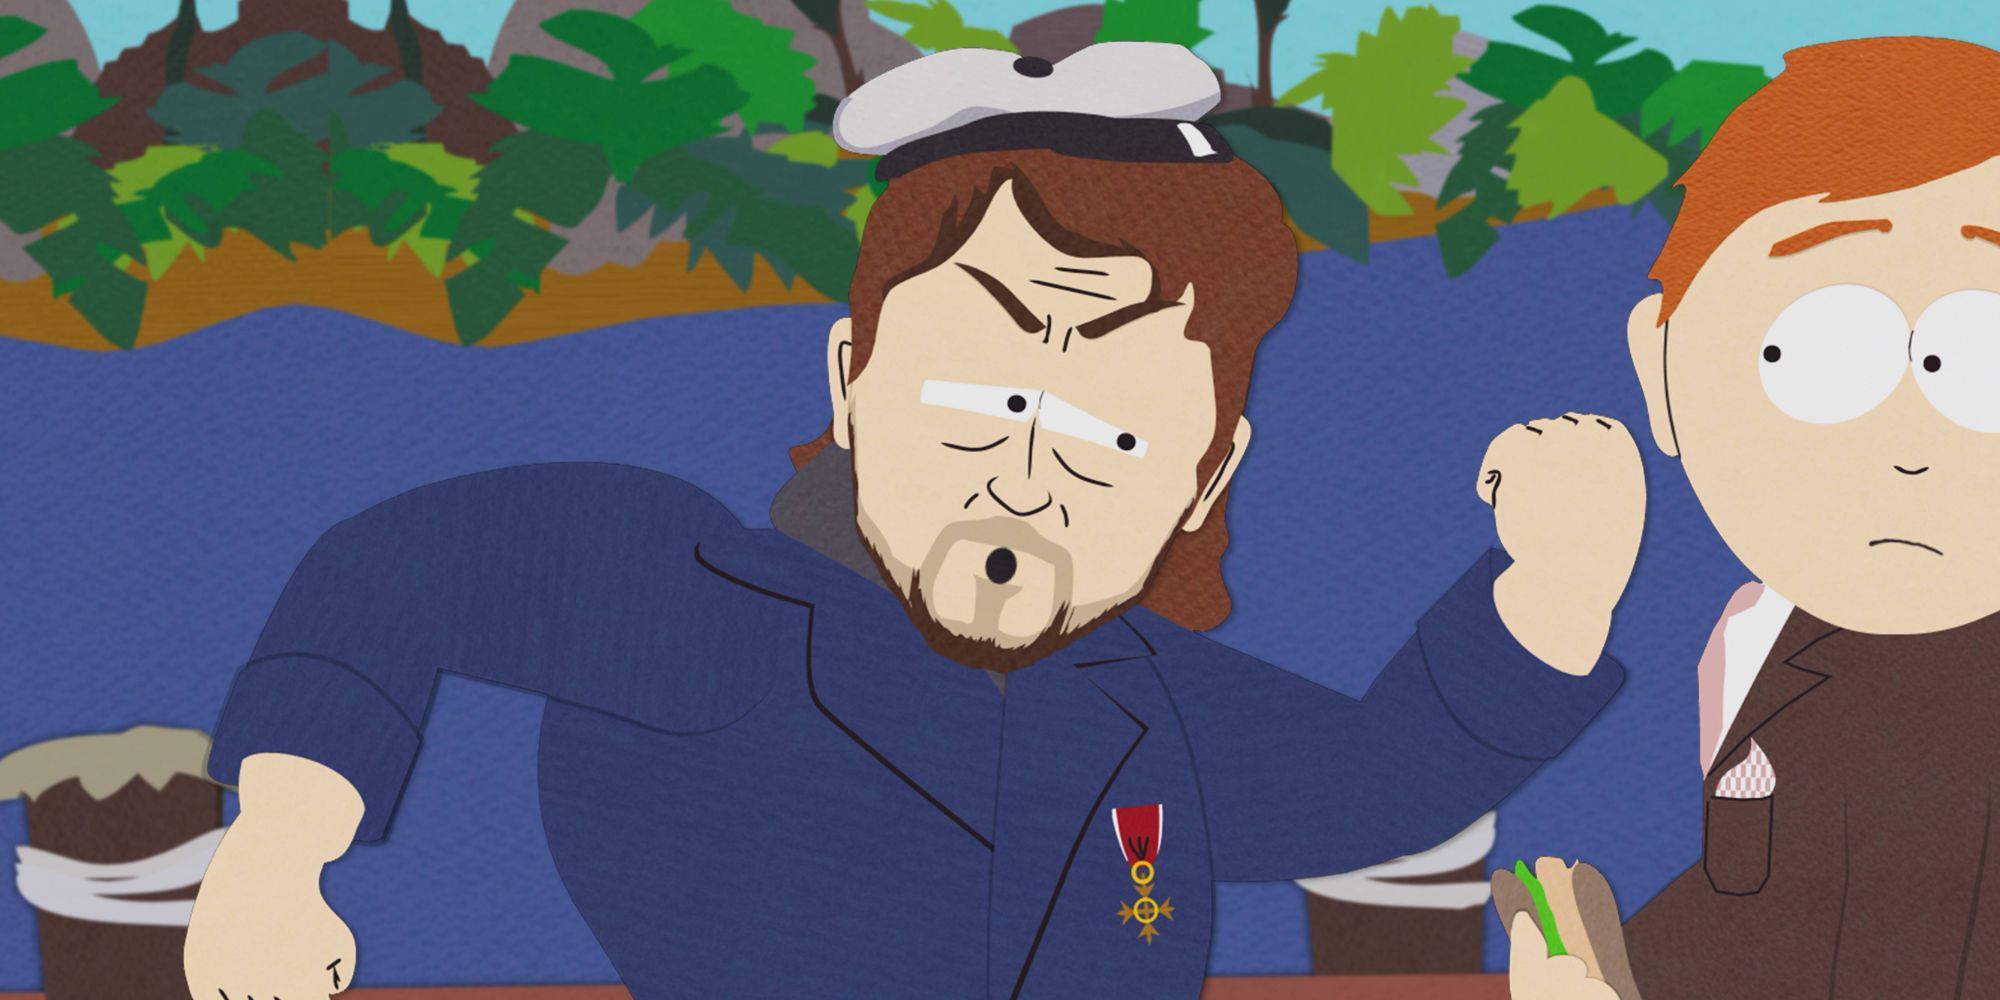 Russell Crowe threatens a man in a sailor suit in South Park